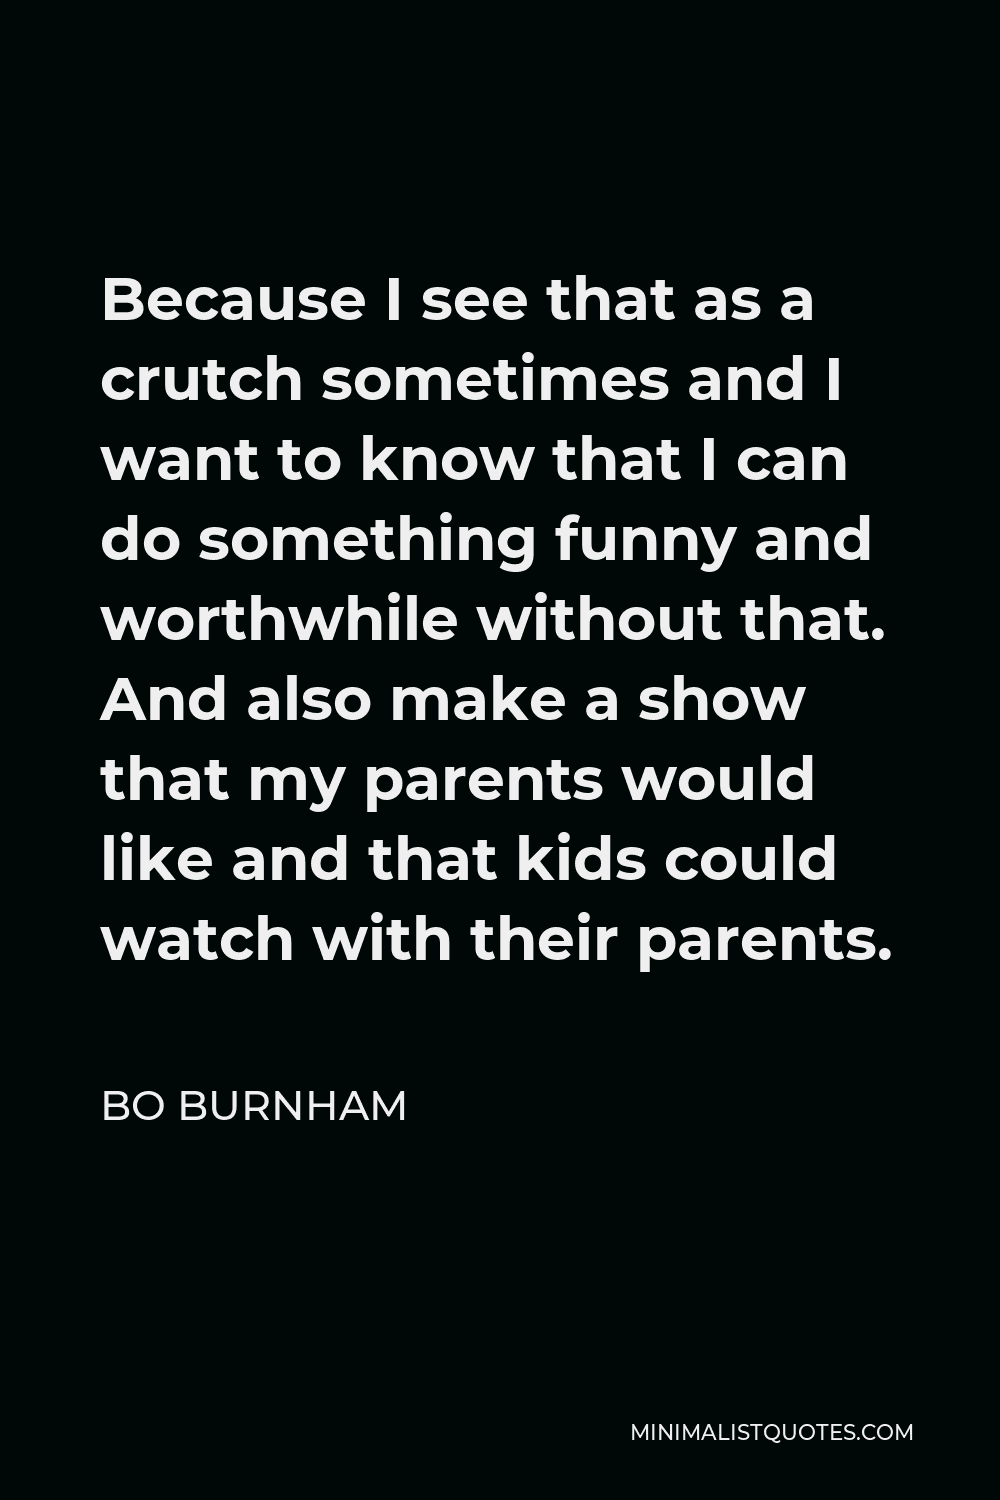 Bo Burnham Quote: Because I see that as a crutch sometimes and I want to  know that I can do something funny and worthwhile without that. And also  make a show that